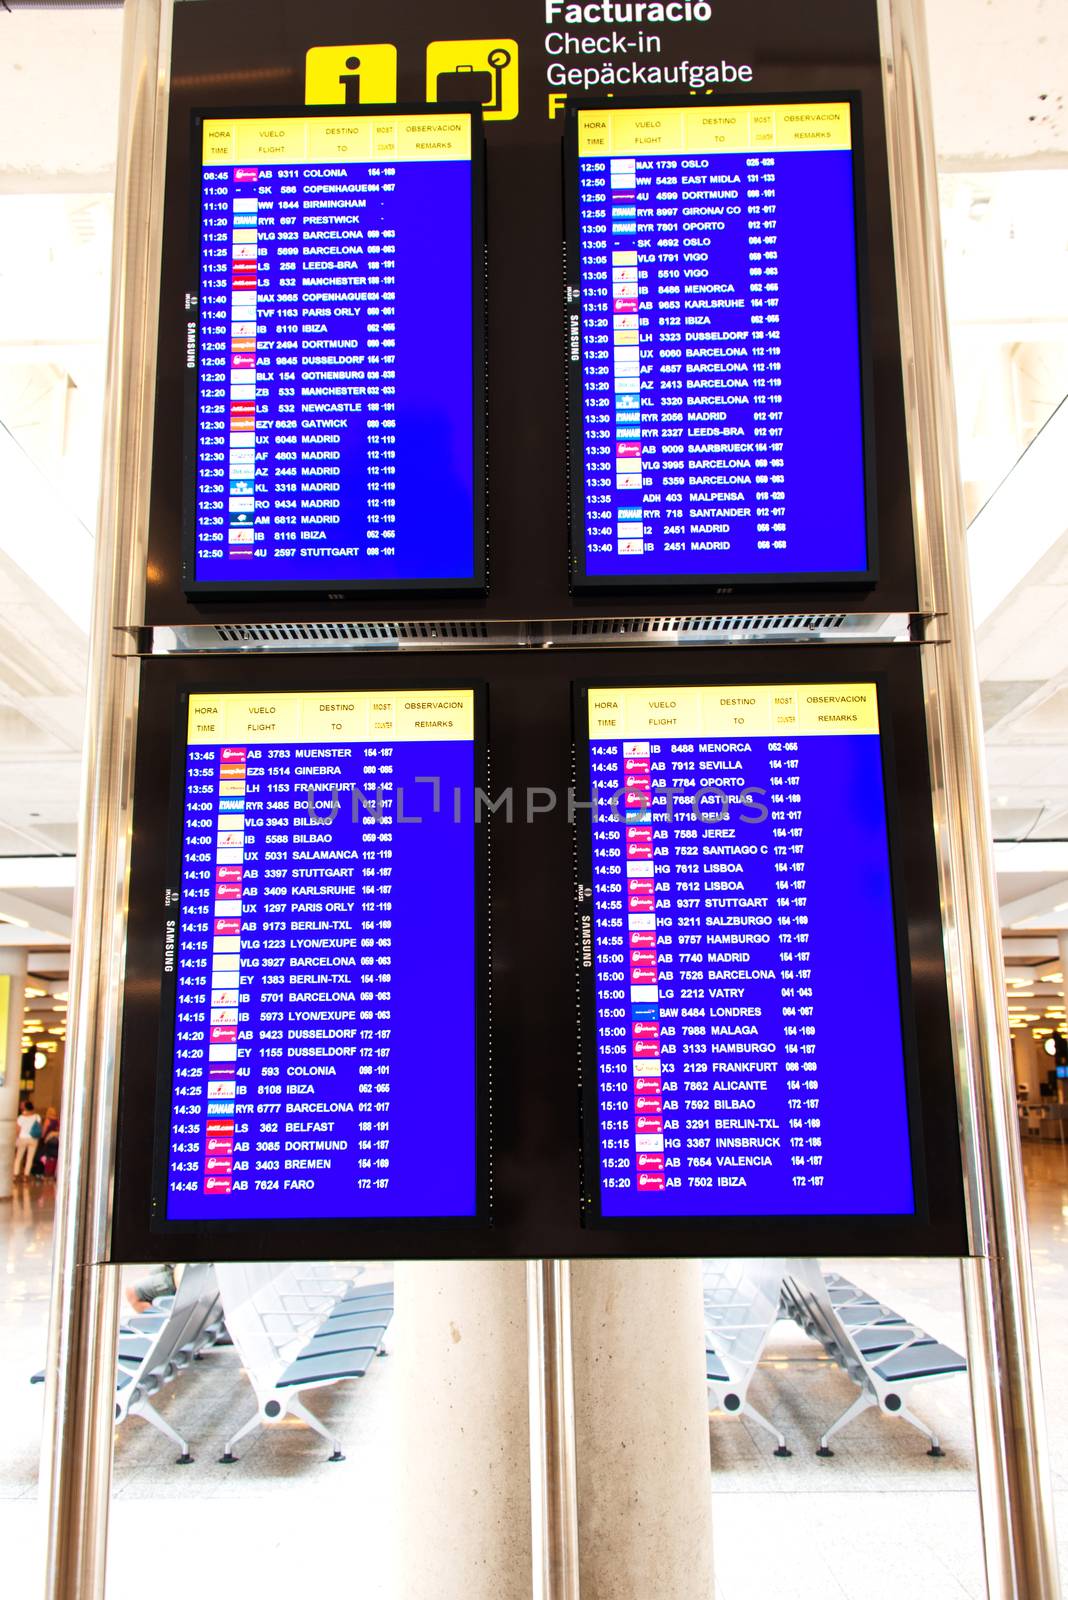 PALMA DE MALLORCA, SPAIN - JULY 18: Information panels at Palma de Mallorca Airport at Mallorca Spain on July 18, 2012 is the third largest airport in Spain, after Madrid's Barajas Airport and Barcelona Airport